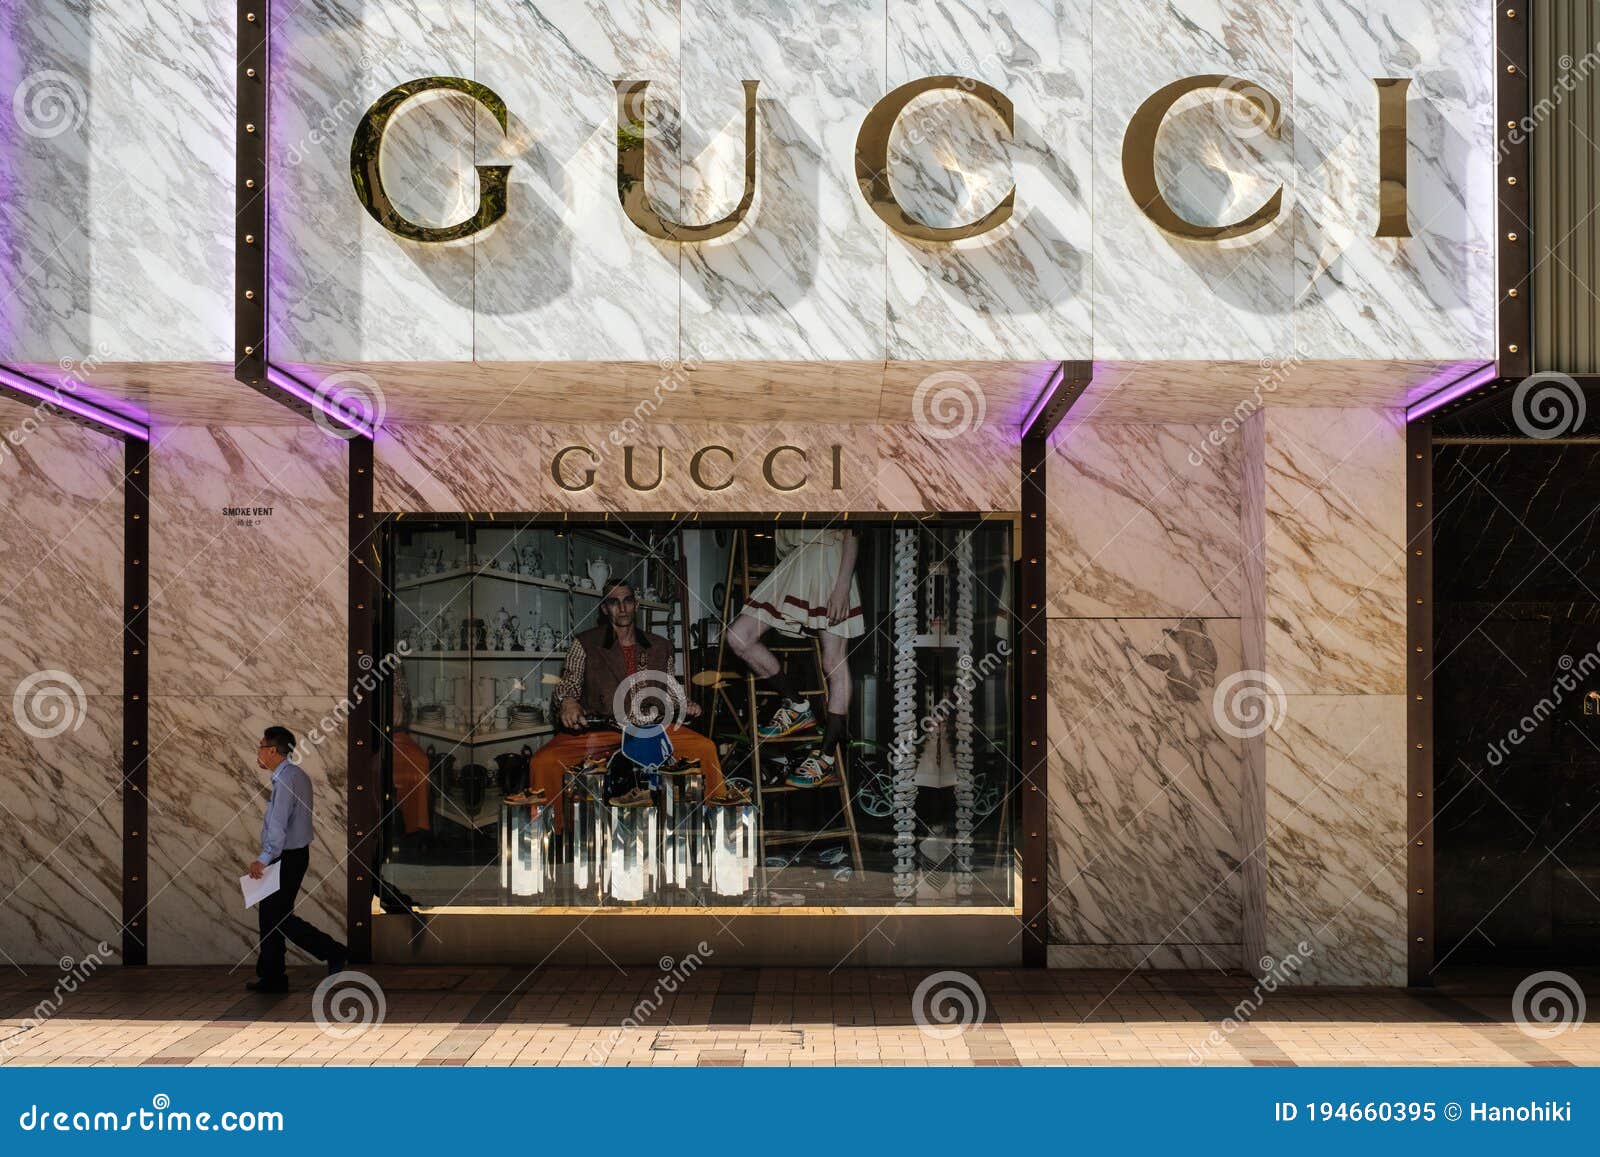 Exterior of the Gucci Store and Shop Window in Hongkong Editorial Image -  Image of branding, clothing: 194660395